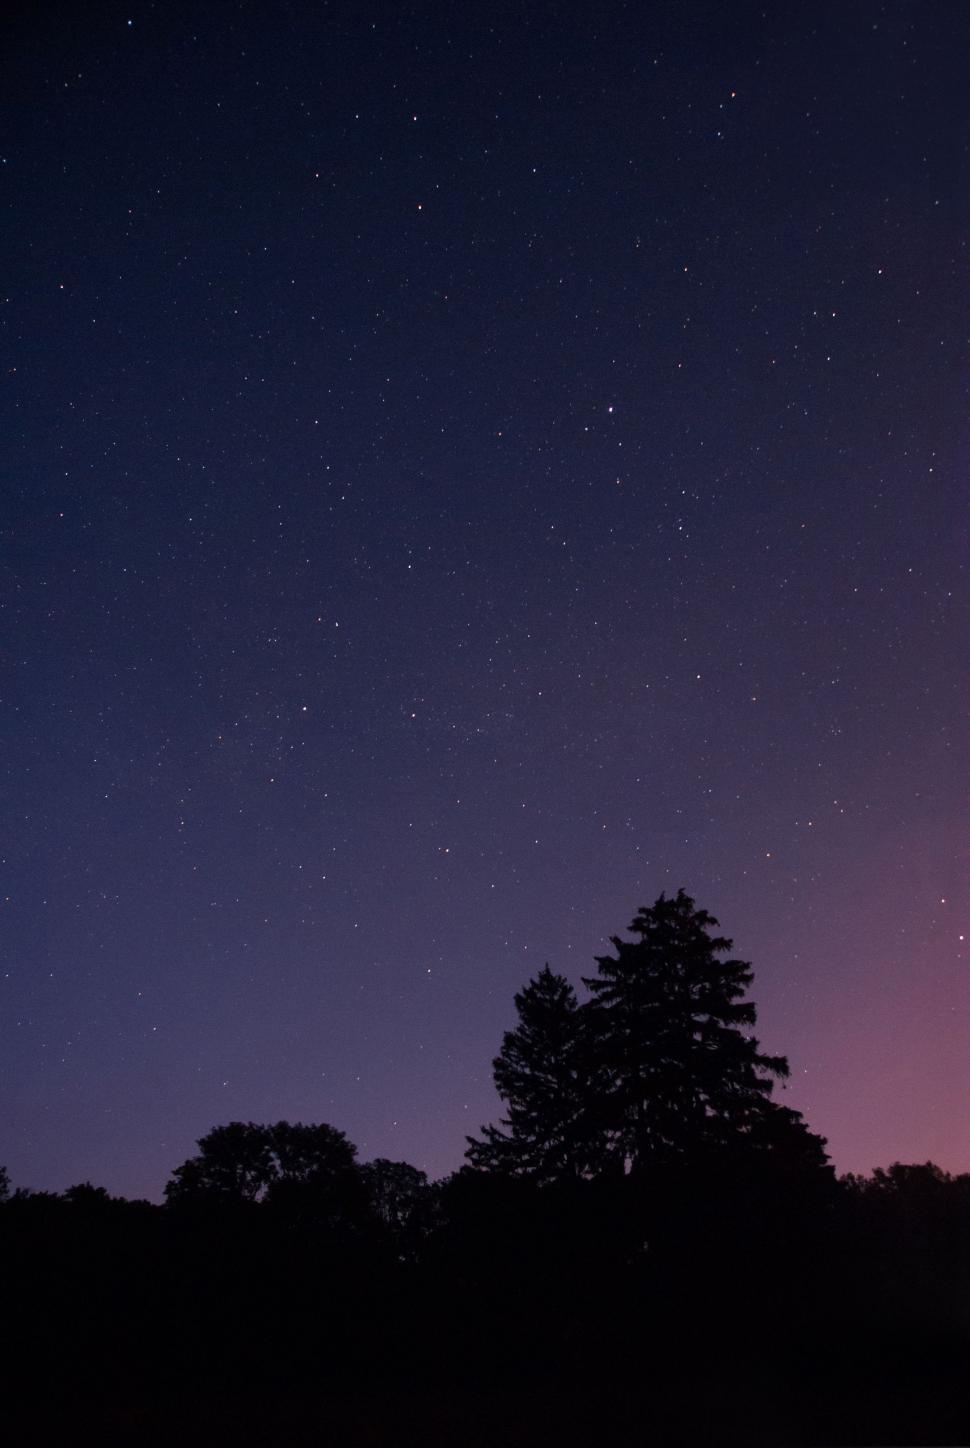 Free Image of Star-Filled Night Sky With Silhouetted Trees 